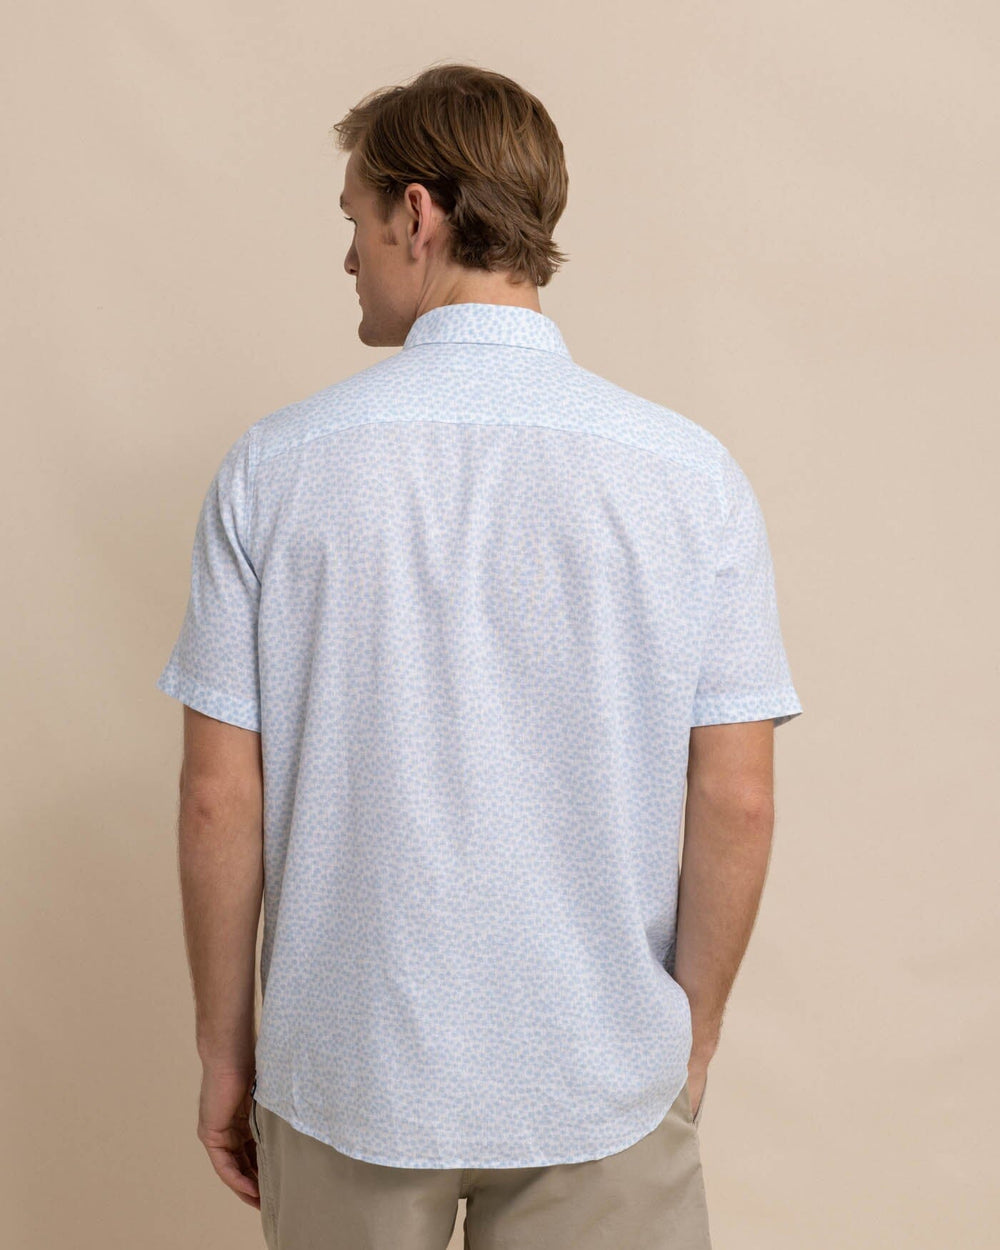 The back view of the Southern Tide Linen Rayon Palm and Breezy Short Sleeve Sport Shirt by Southern Tide - Clearwater Blue